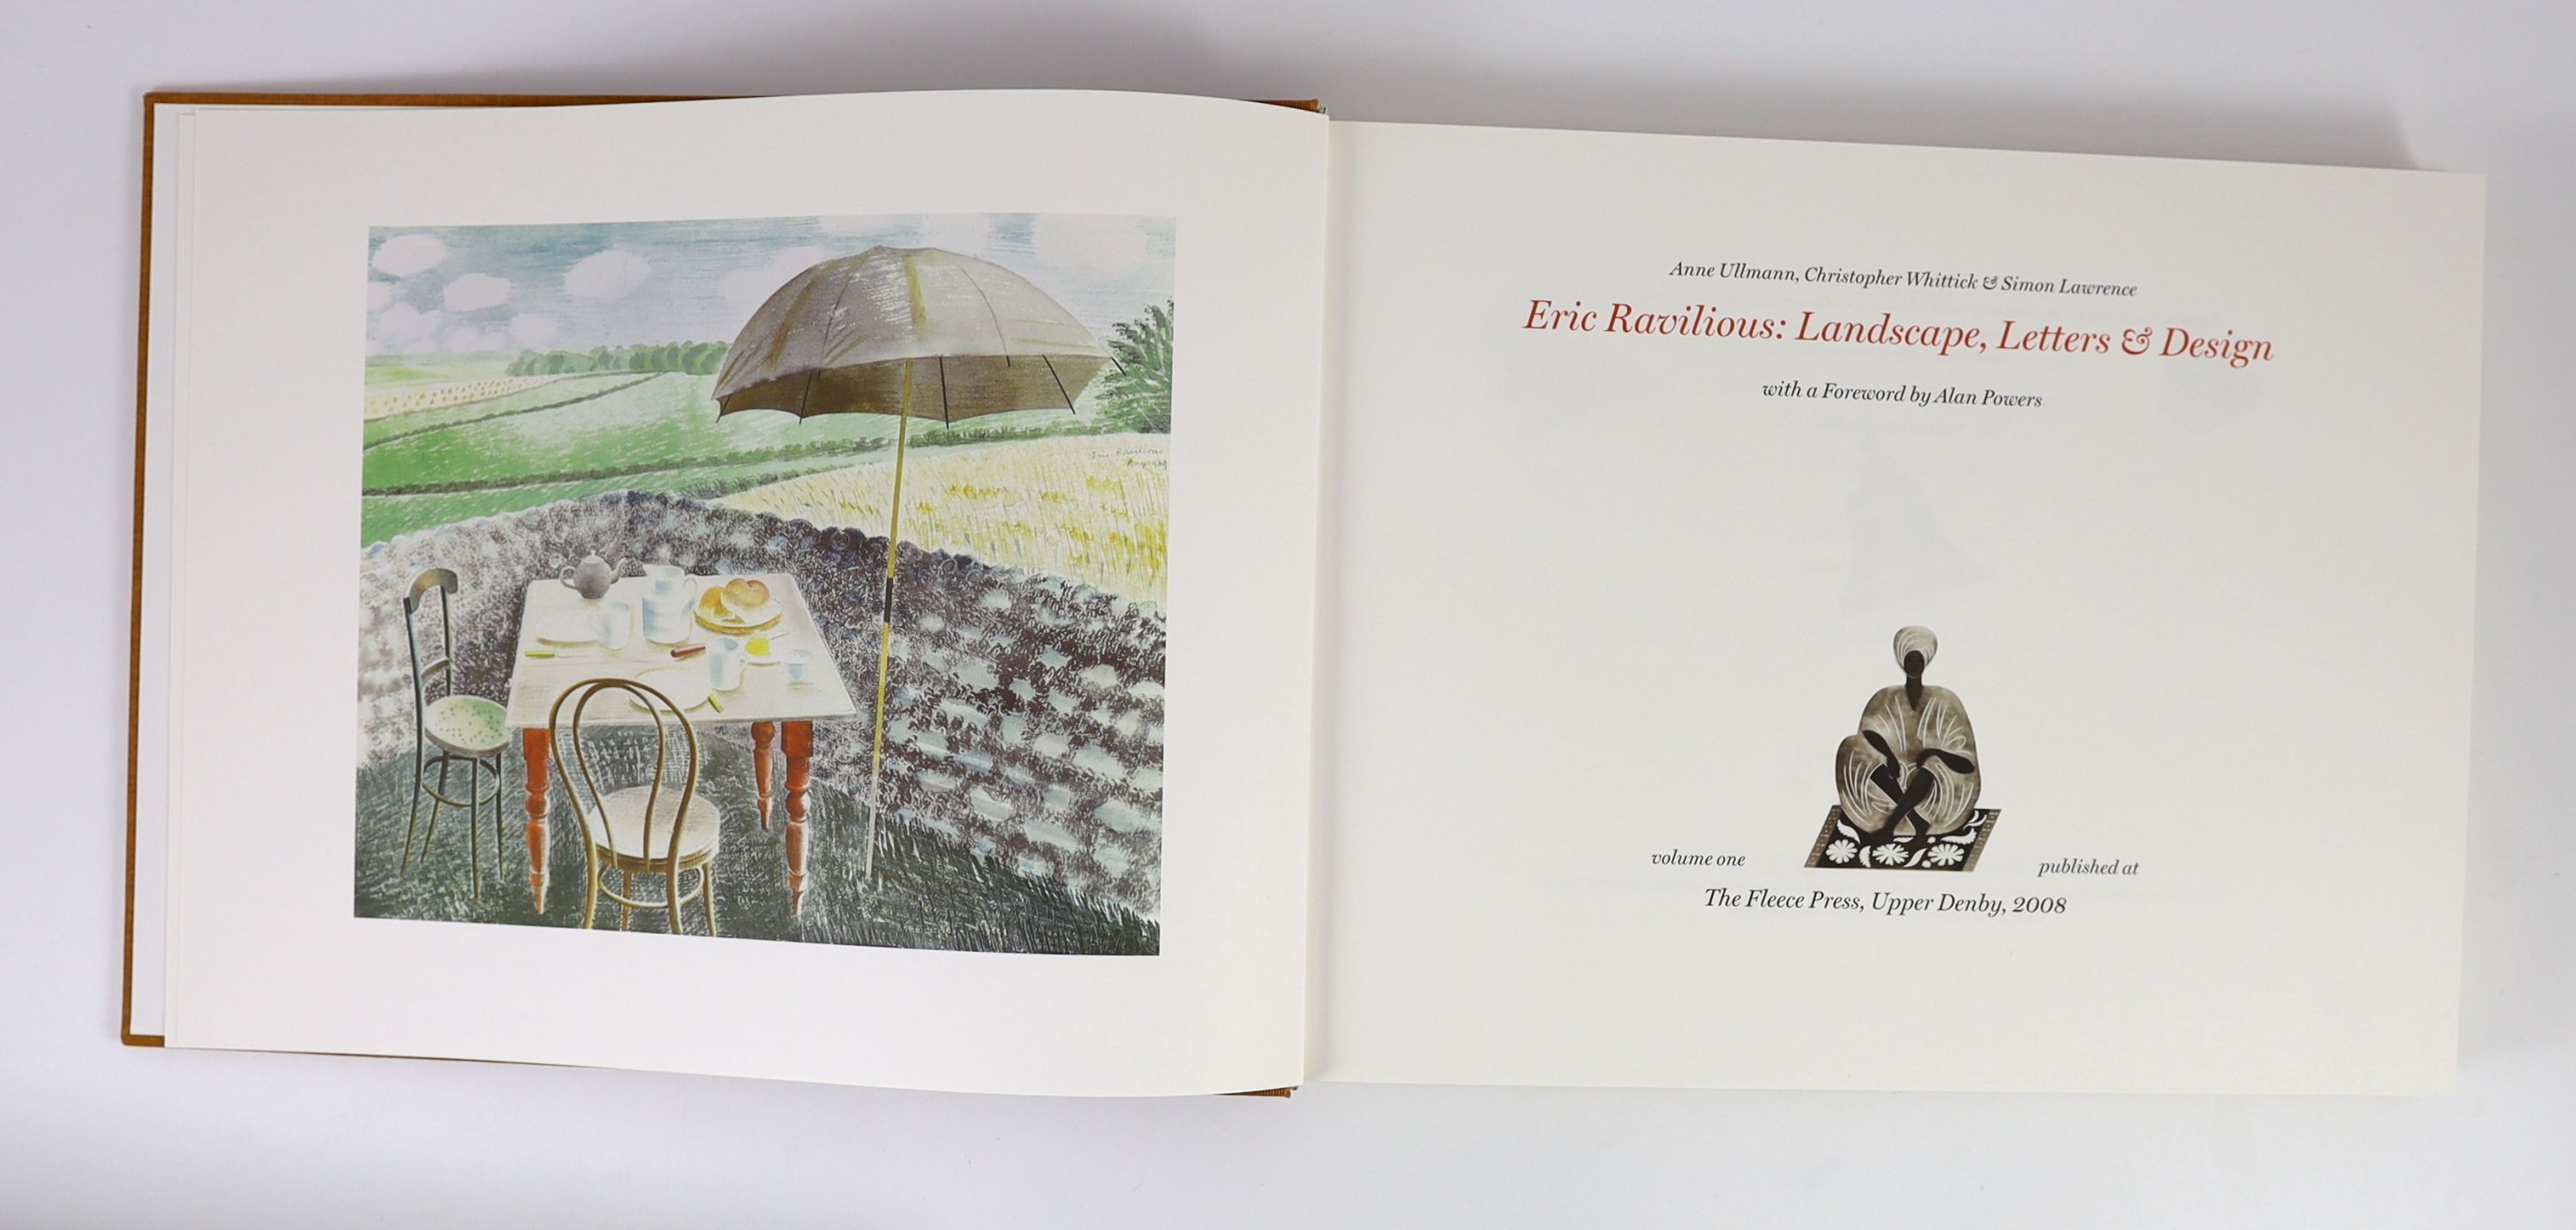 Ullmann, Anne - Whittick, Christopher and Lawrence, Simon - Eric Ravilious: Landscape, Letters and Design, 2 vols, one of 750, oblong 4to, The Fleece Press, Upper Denby, 2008, in slip case.